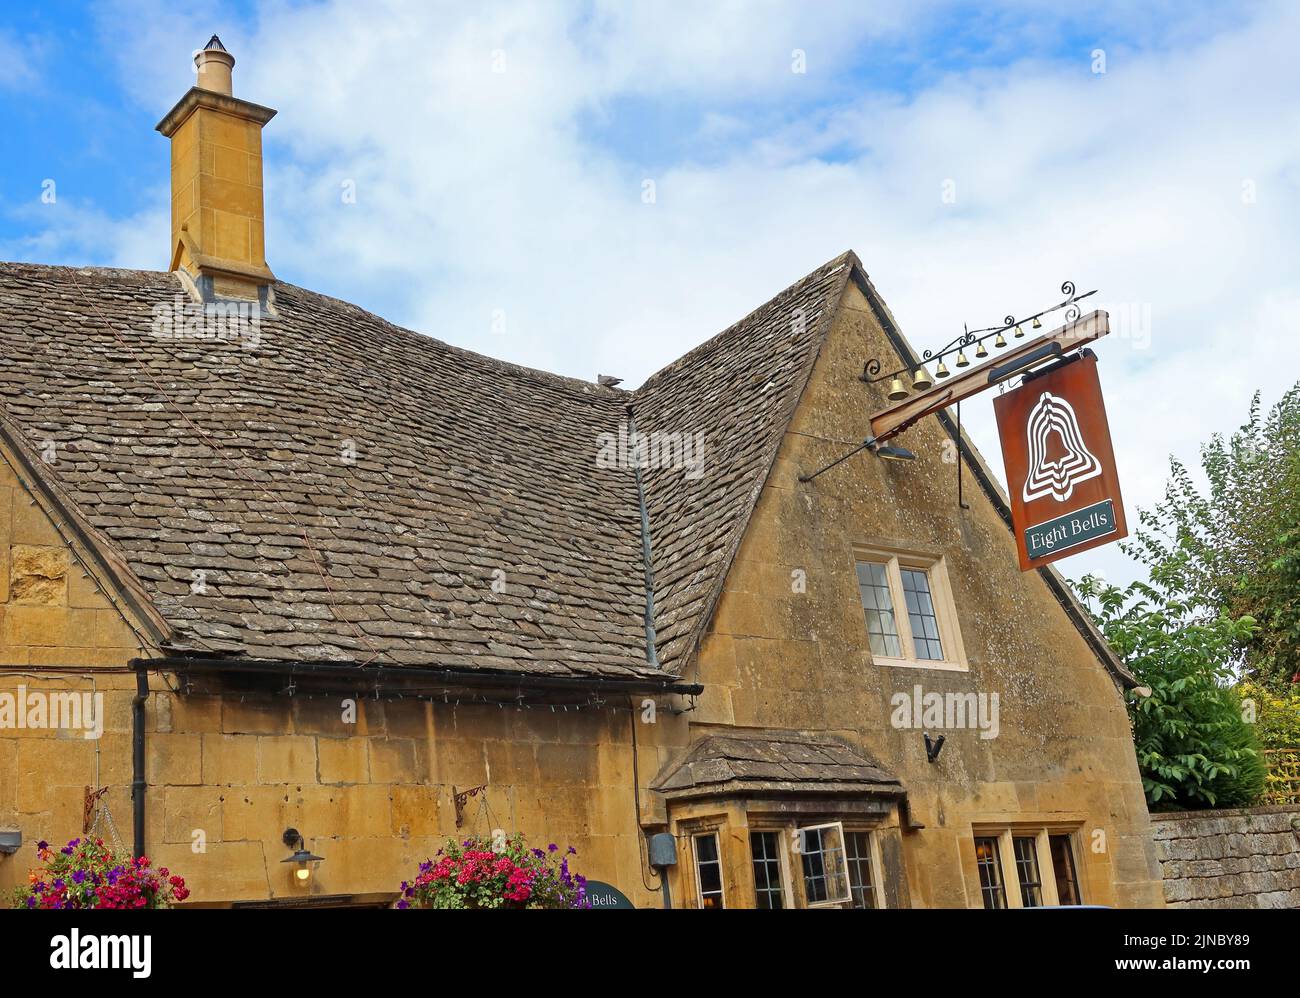 8 bells Inn, local bar for Chipping Camden, Cotswolds market town, Cotswold, Oxfordshire, England, UK, GL55 6AA Stock Photo